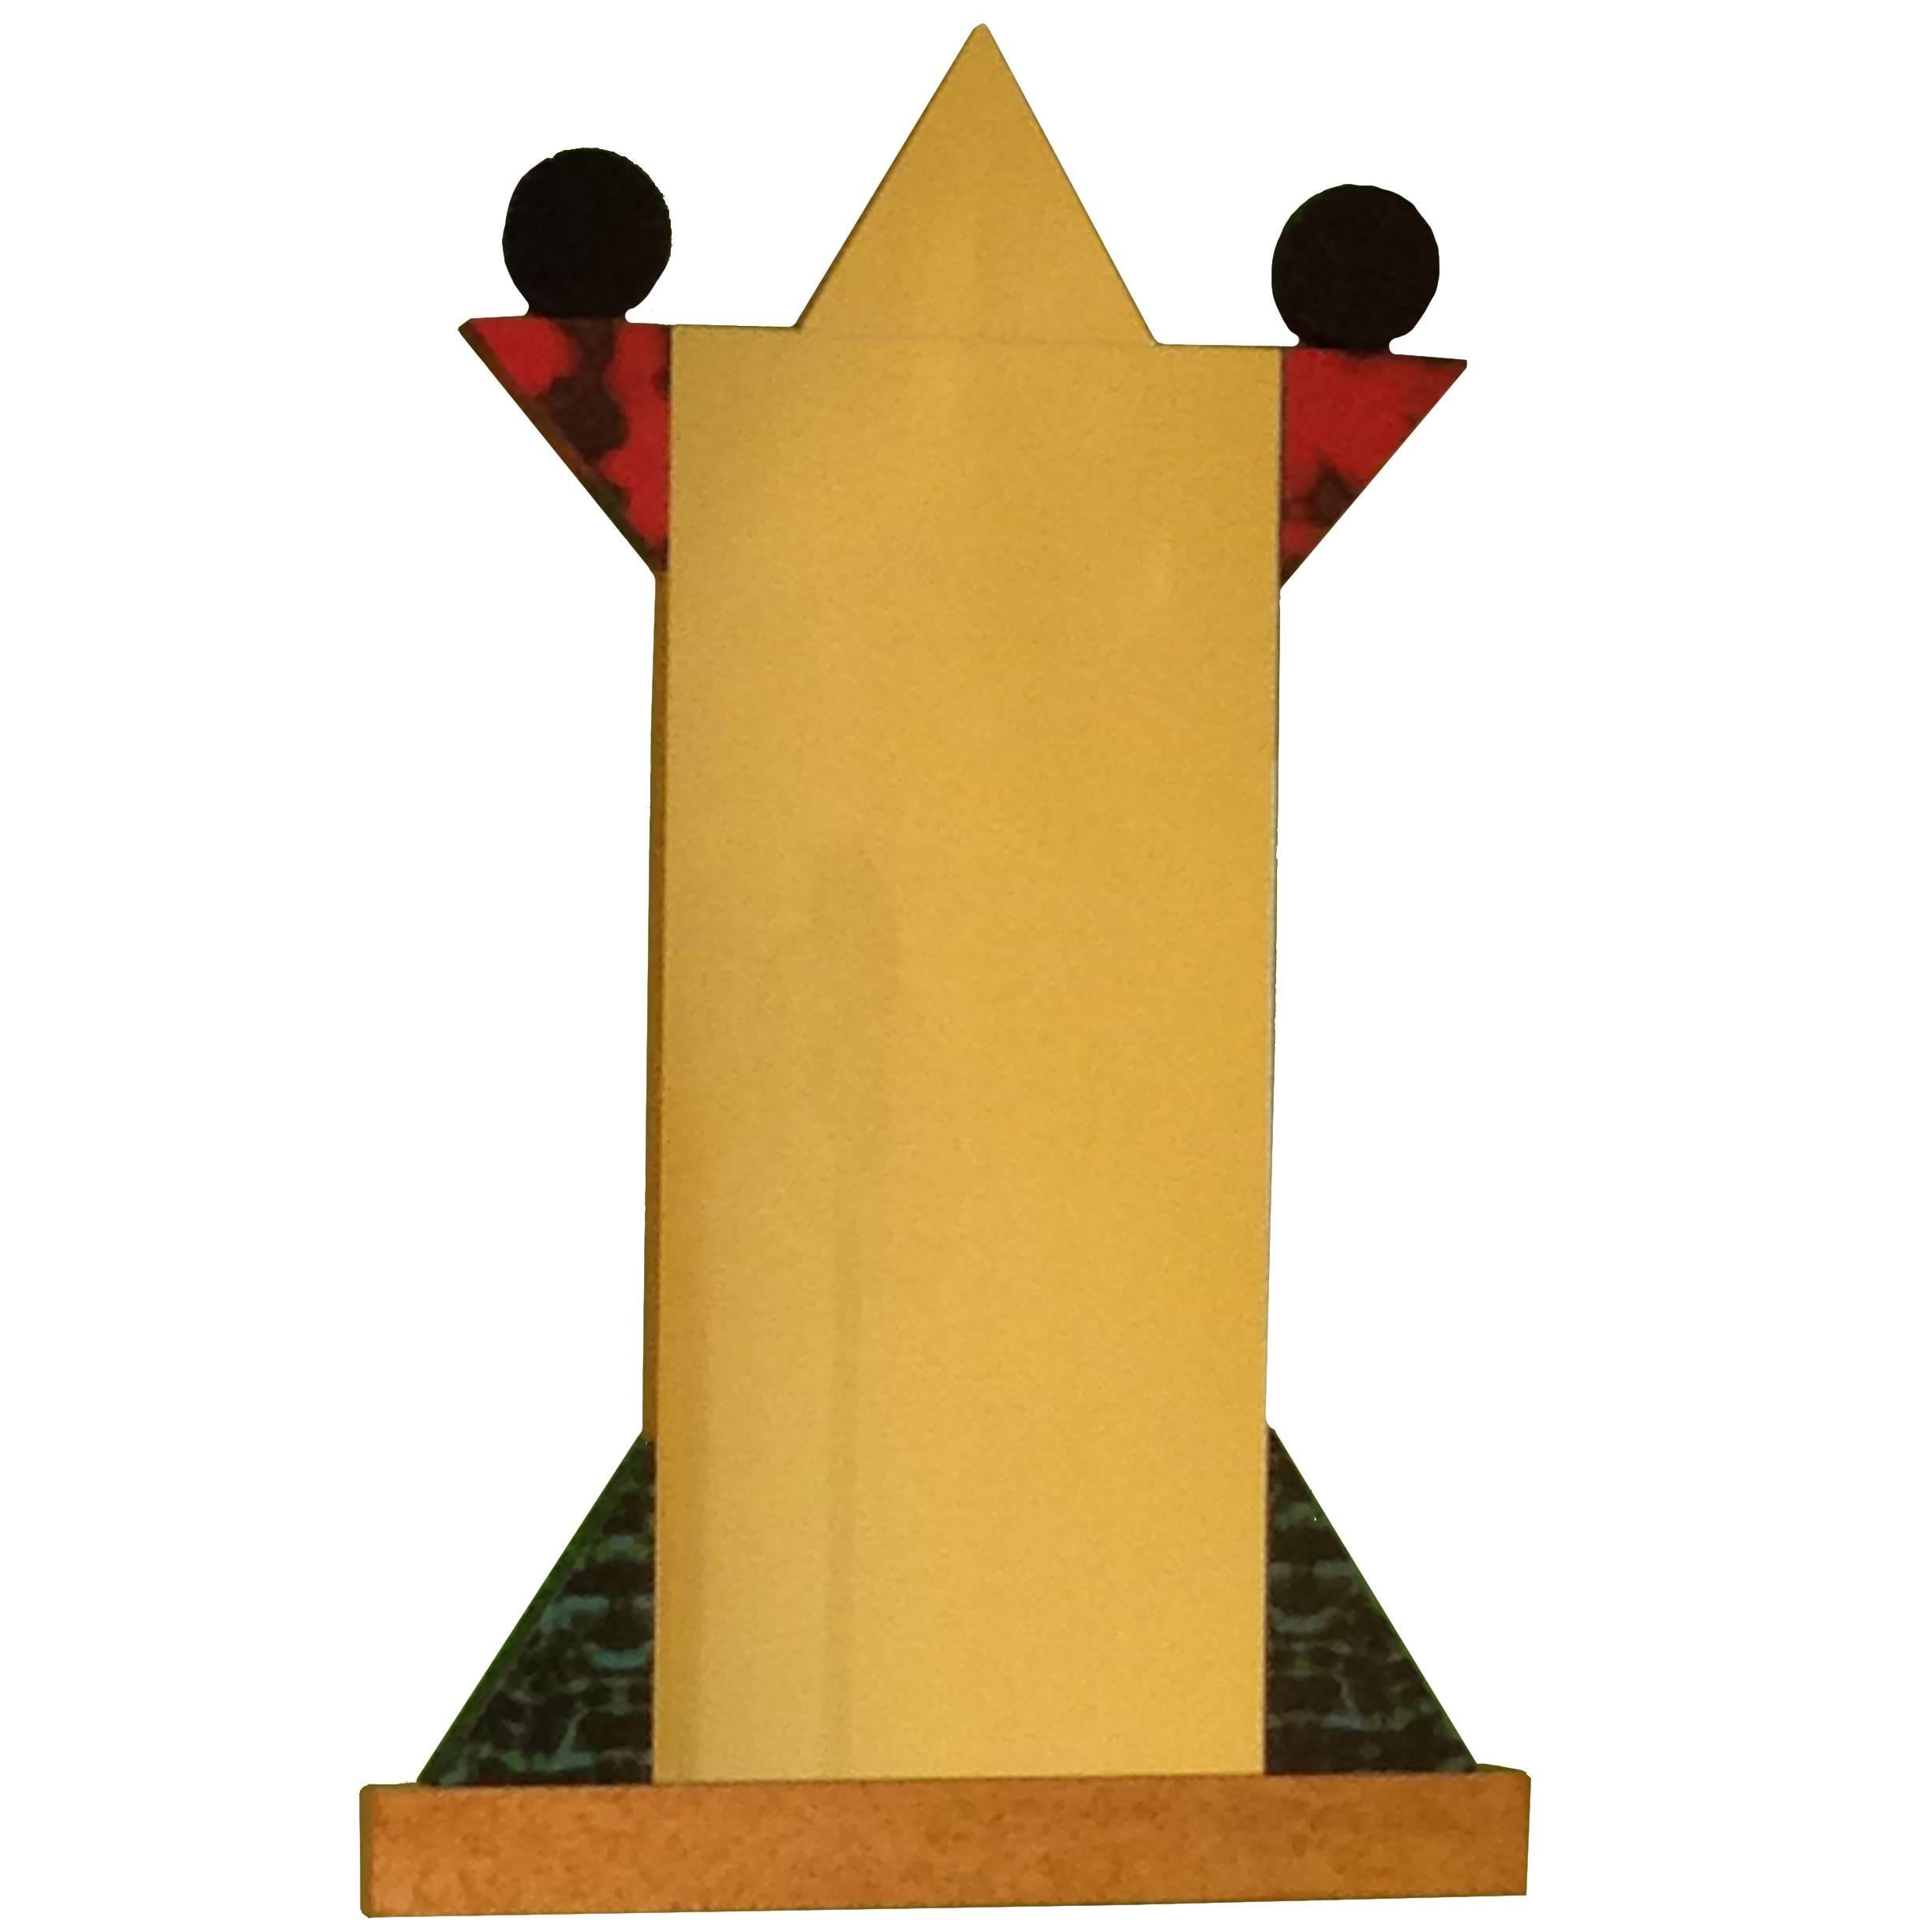 No one but Ettore Sottsass could've designed such an elegant mirror -- an homage to his love of the human psyche, 